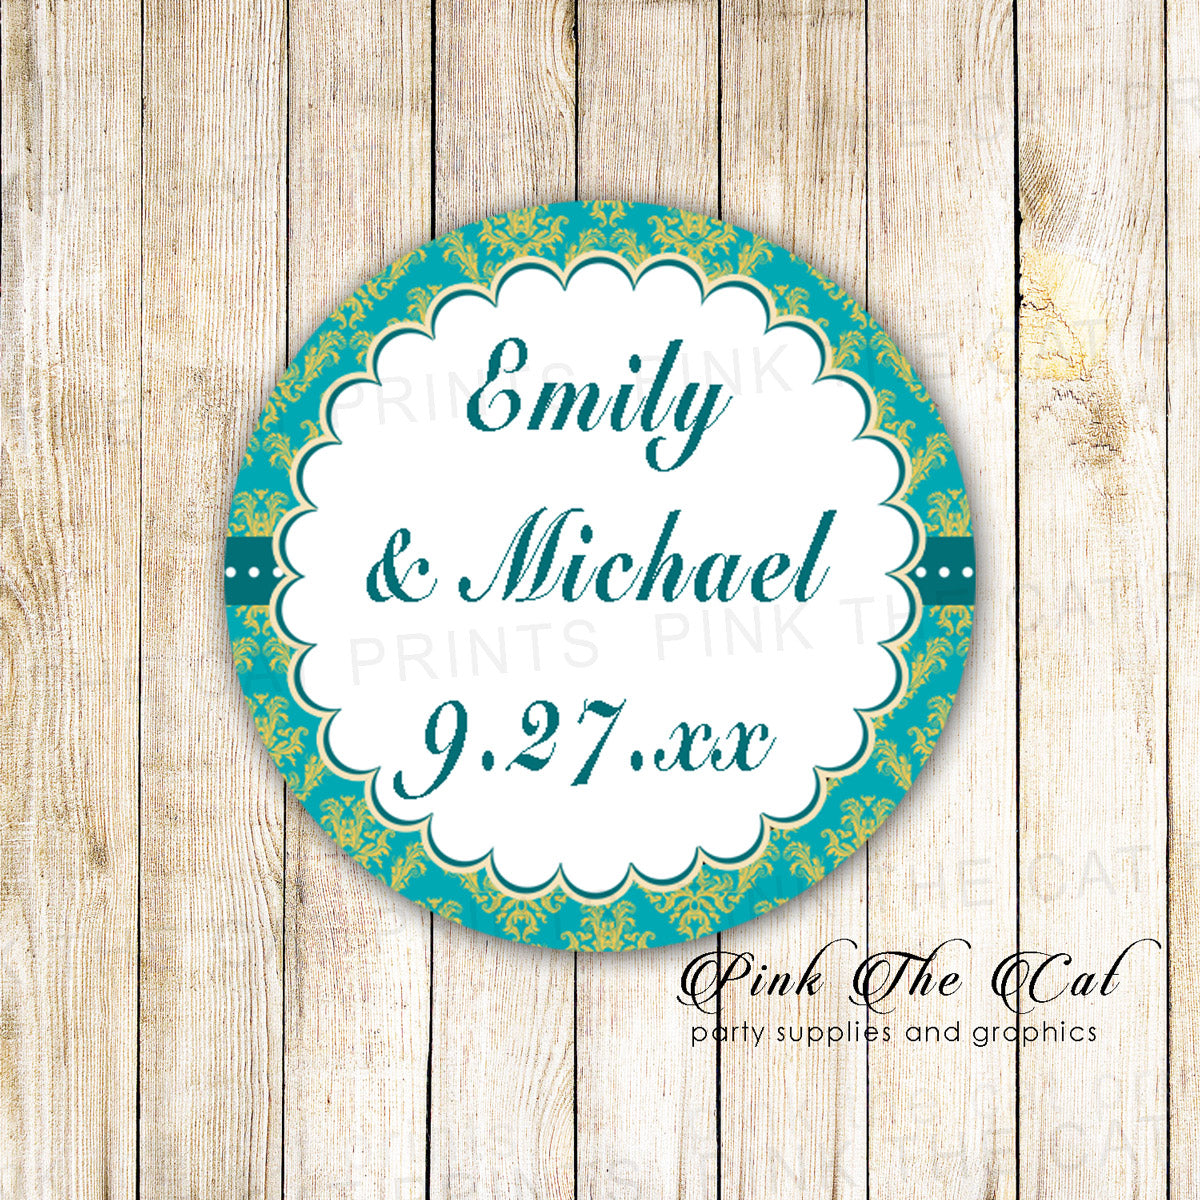 40 Stickers Favor Label Damask Teal Gold Adult Birthday